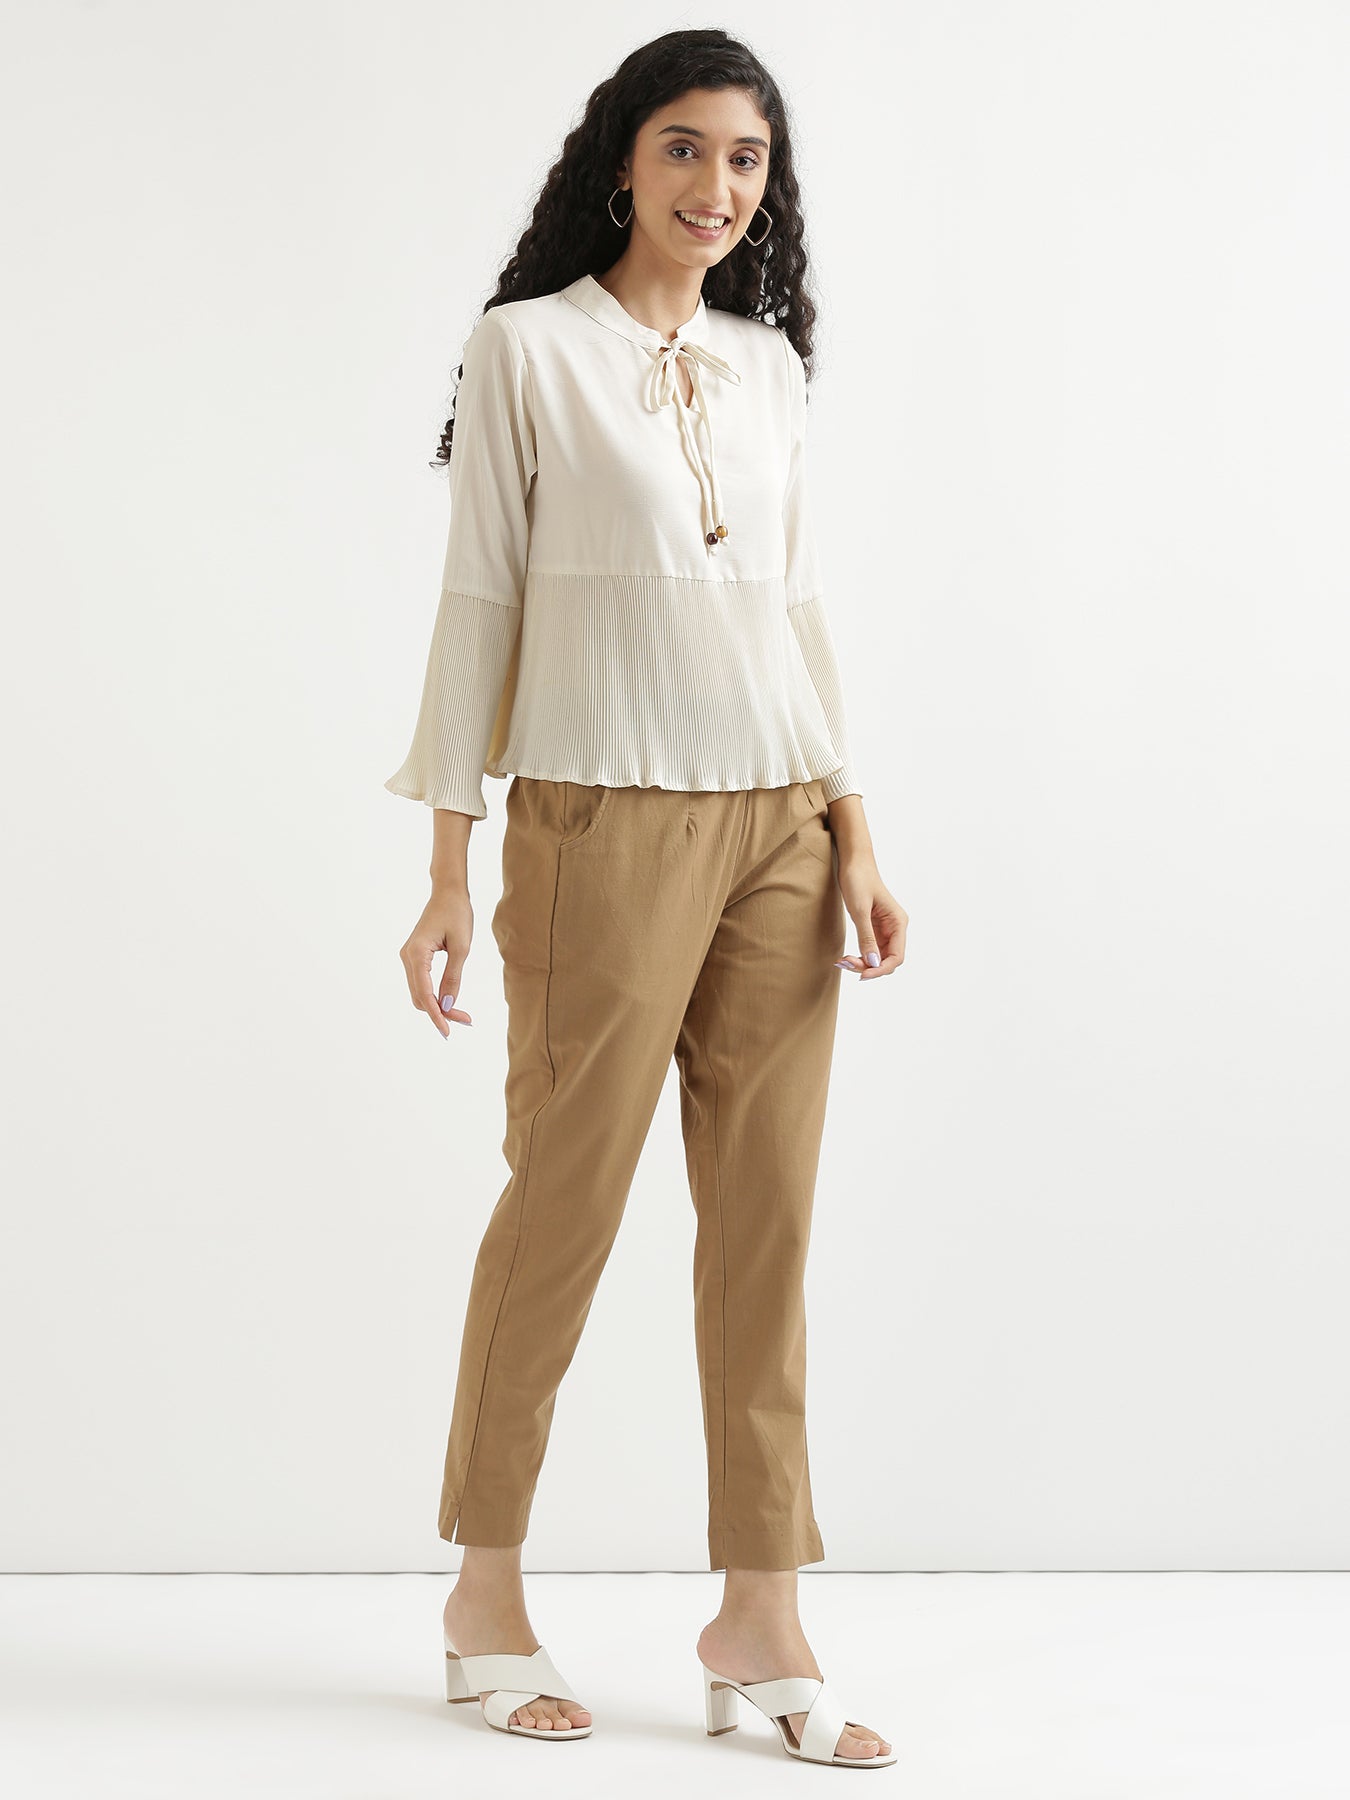 Coffee Brown Cotton Trouser For Women, Regular Fit